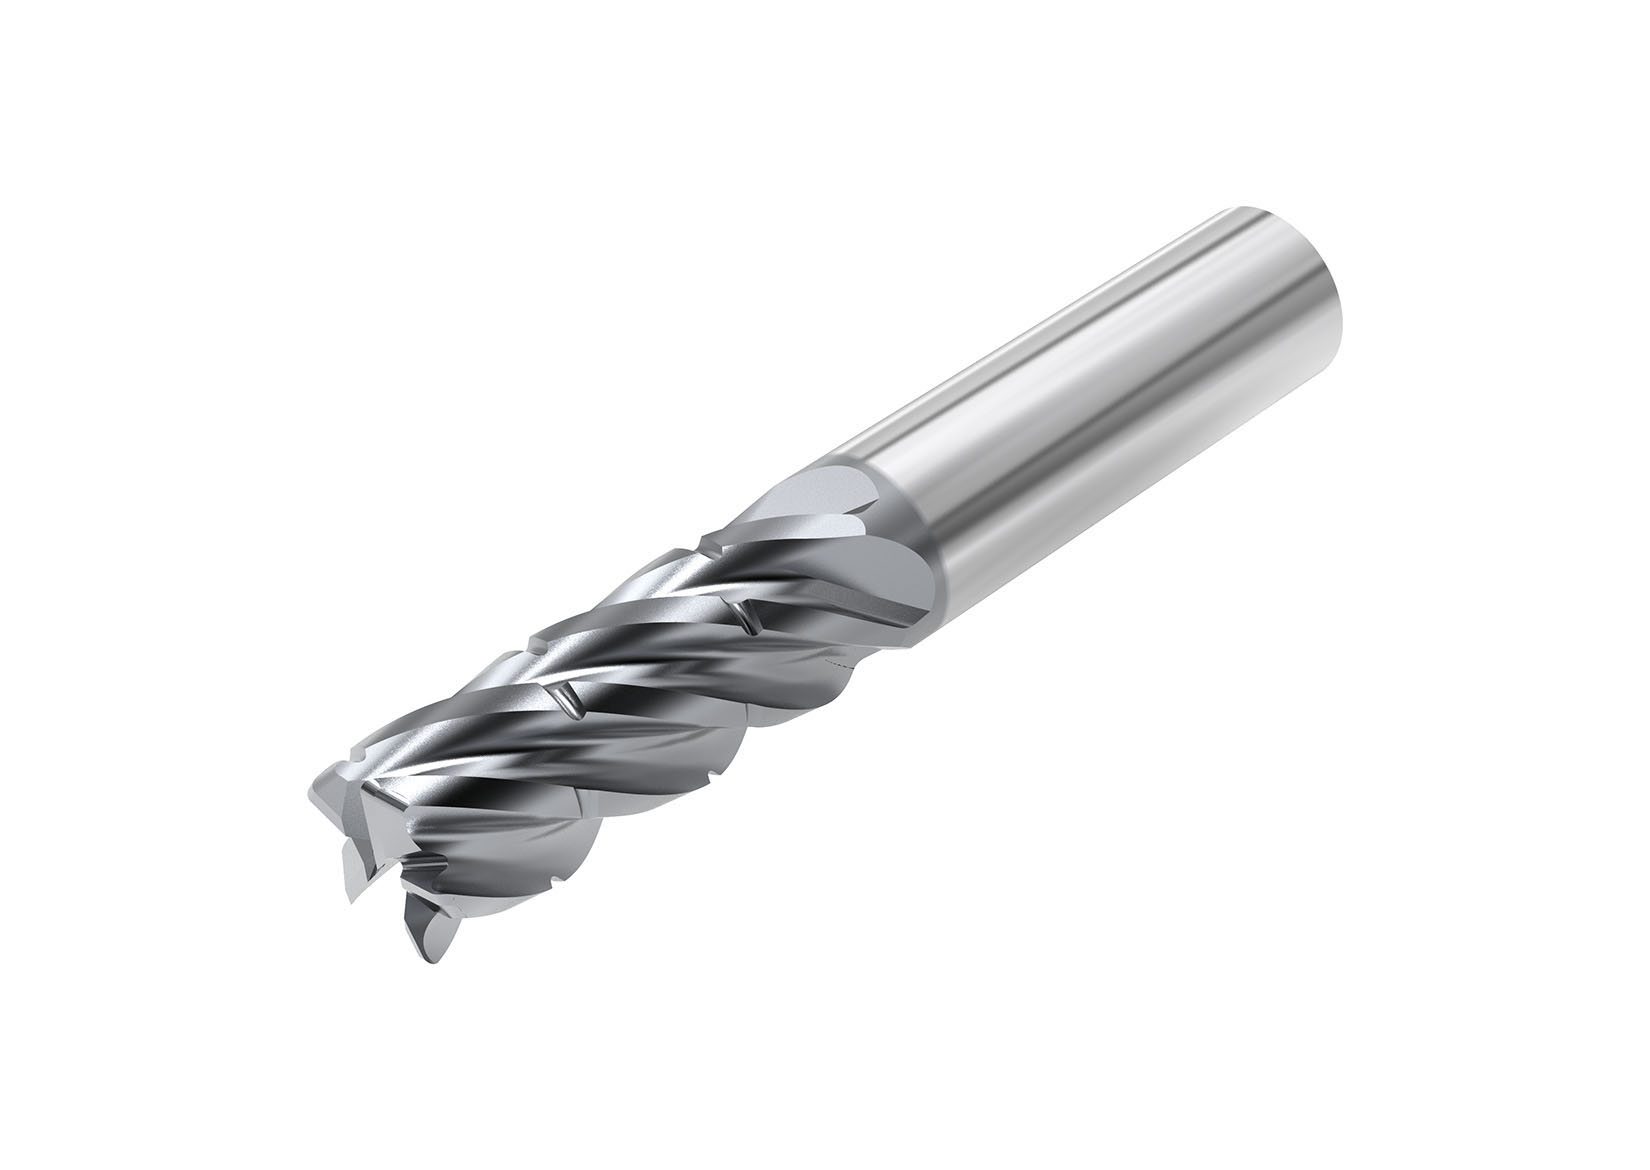 New Seco Niagara Cutter™ 5-flute End Mill Delivers Extreme Versatility ...